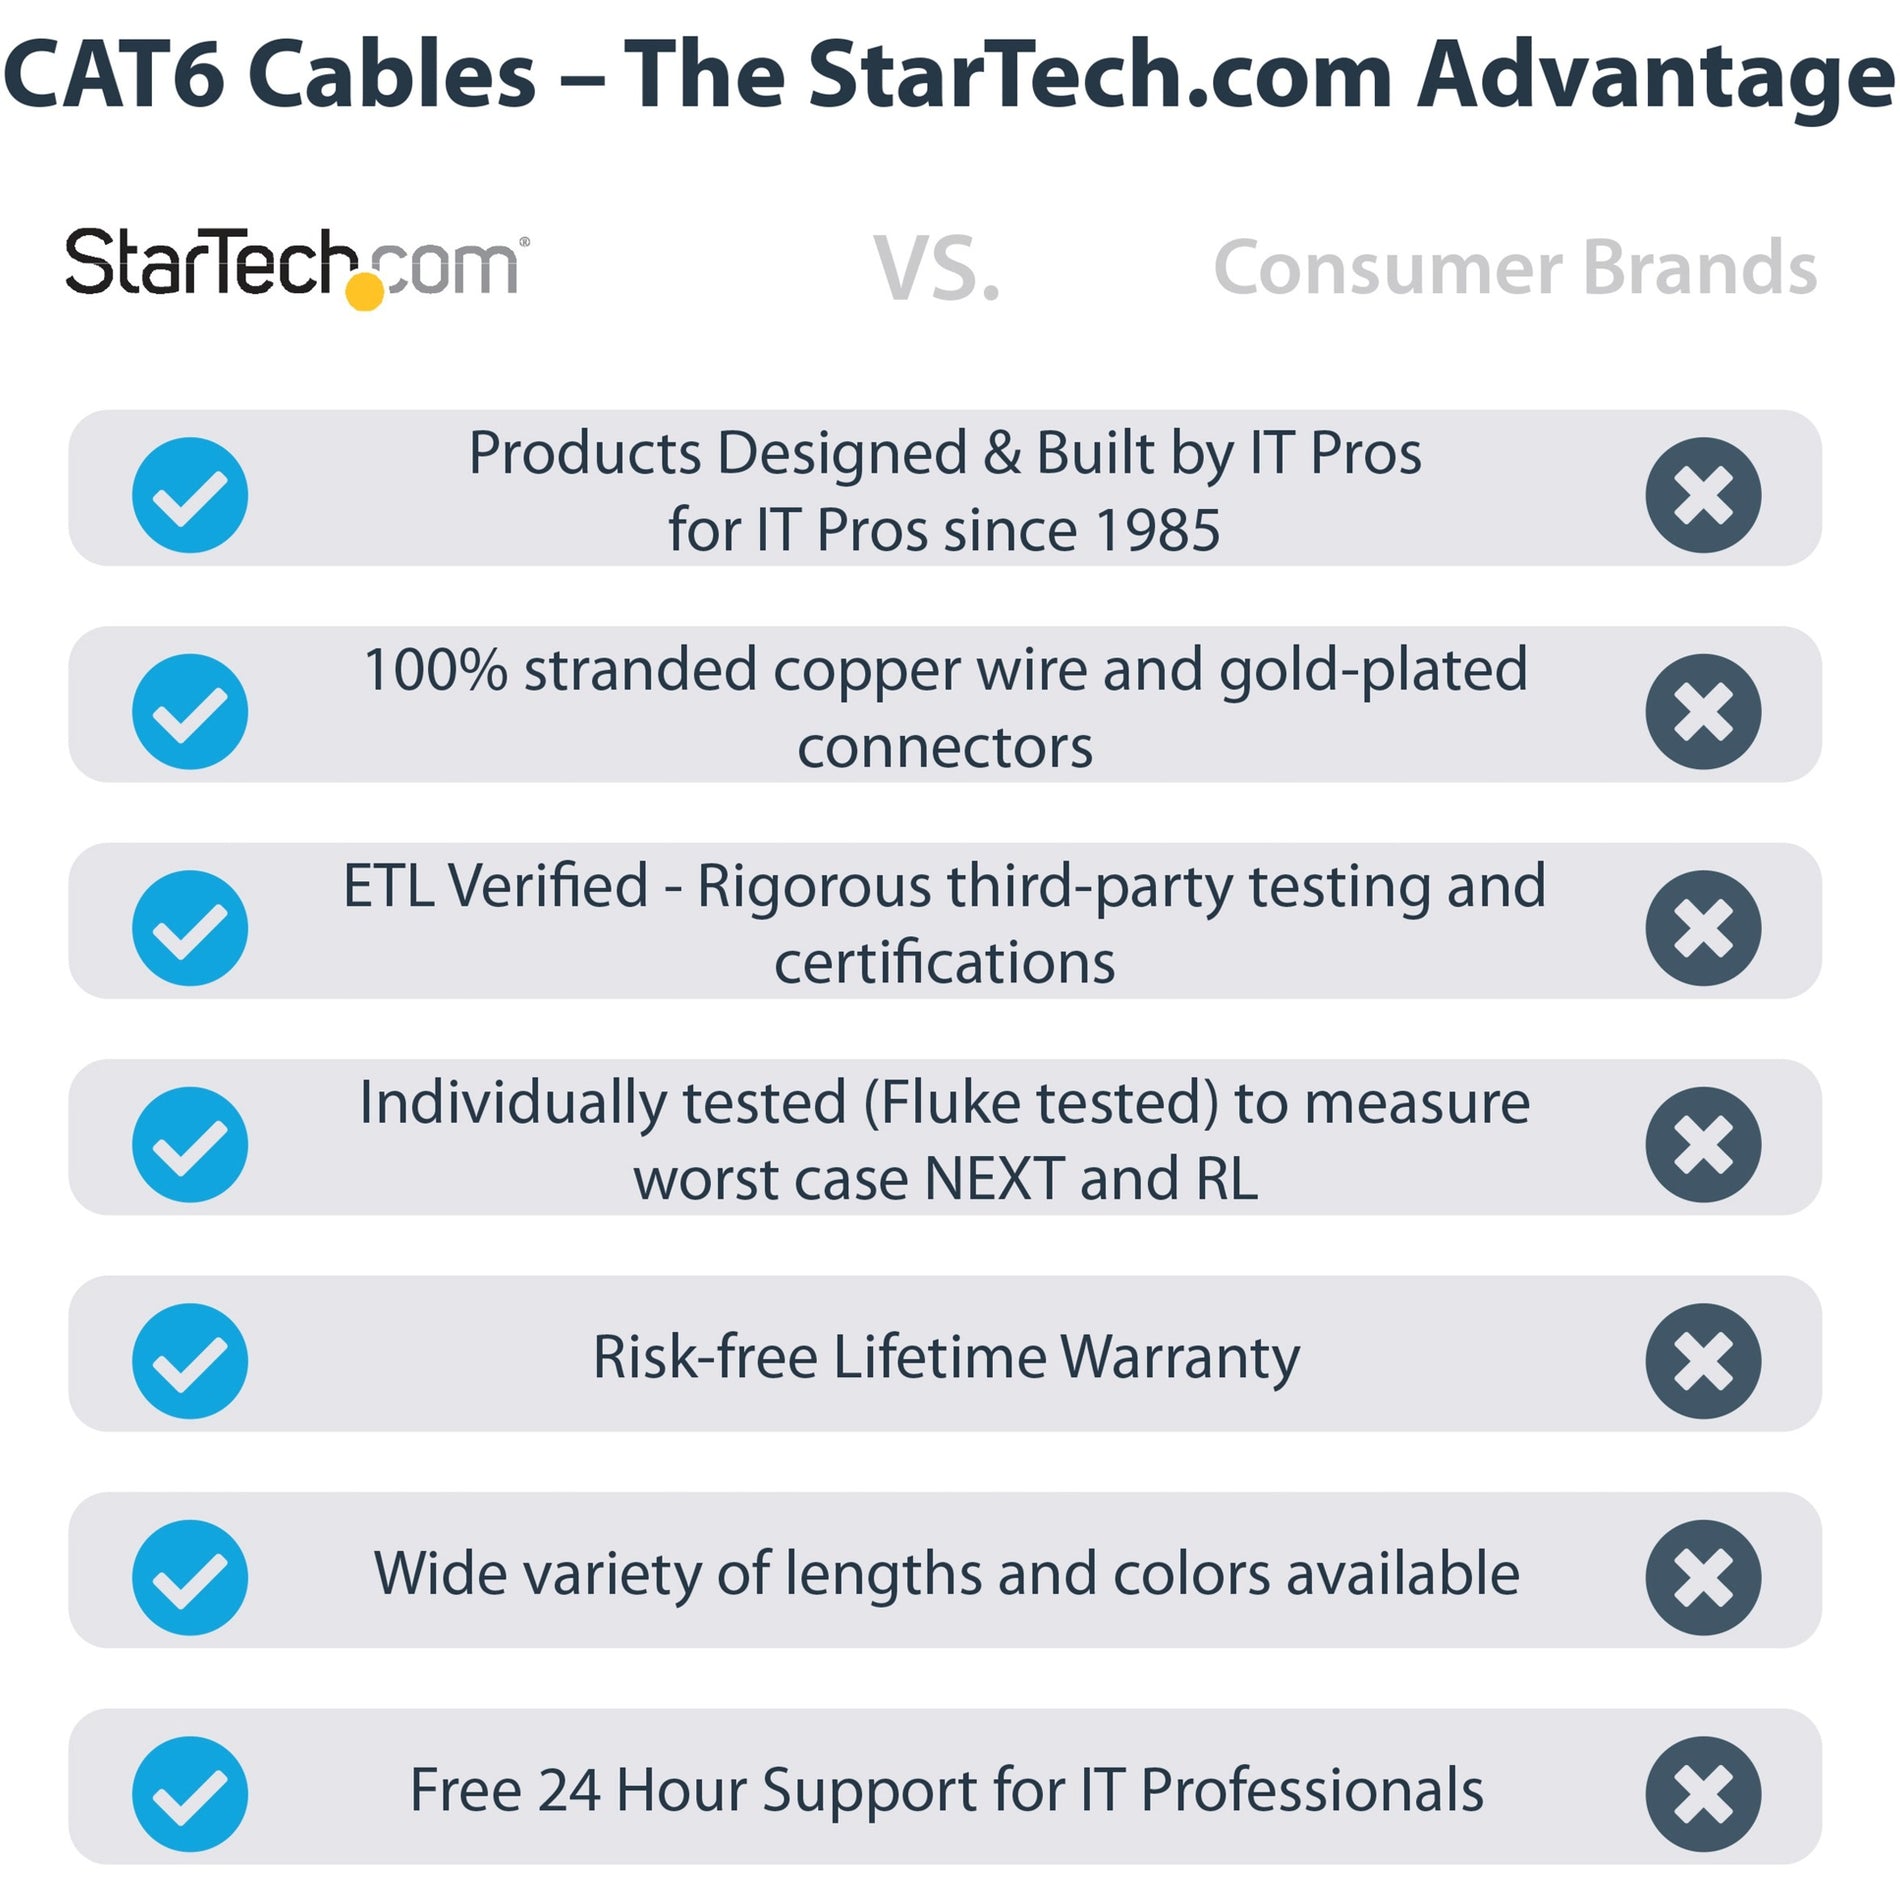 StarTech.com C6PATCH20BL 20ft Blue Molded Cat6 UTP Patch Cable 10 Gbit/s Data Transfer Rate PoE+ Compatible  スタートック・ドットコム C6PATCH20BL 20フィート 青 製成キャット6 UTPパッチケーブル、10ギガビット/秒 データ転送速度、PoE+ 対応